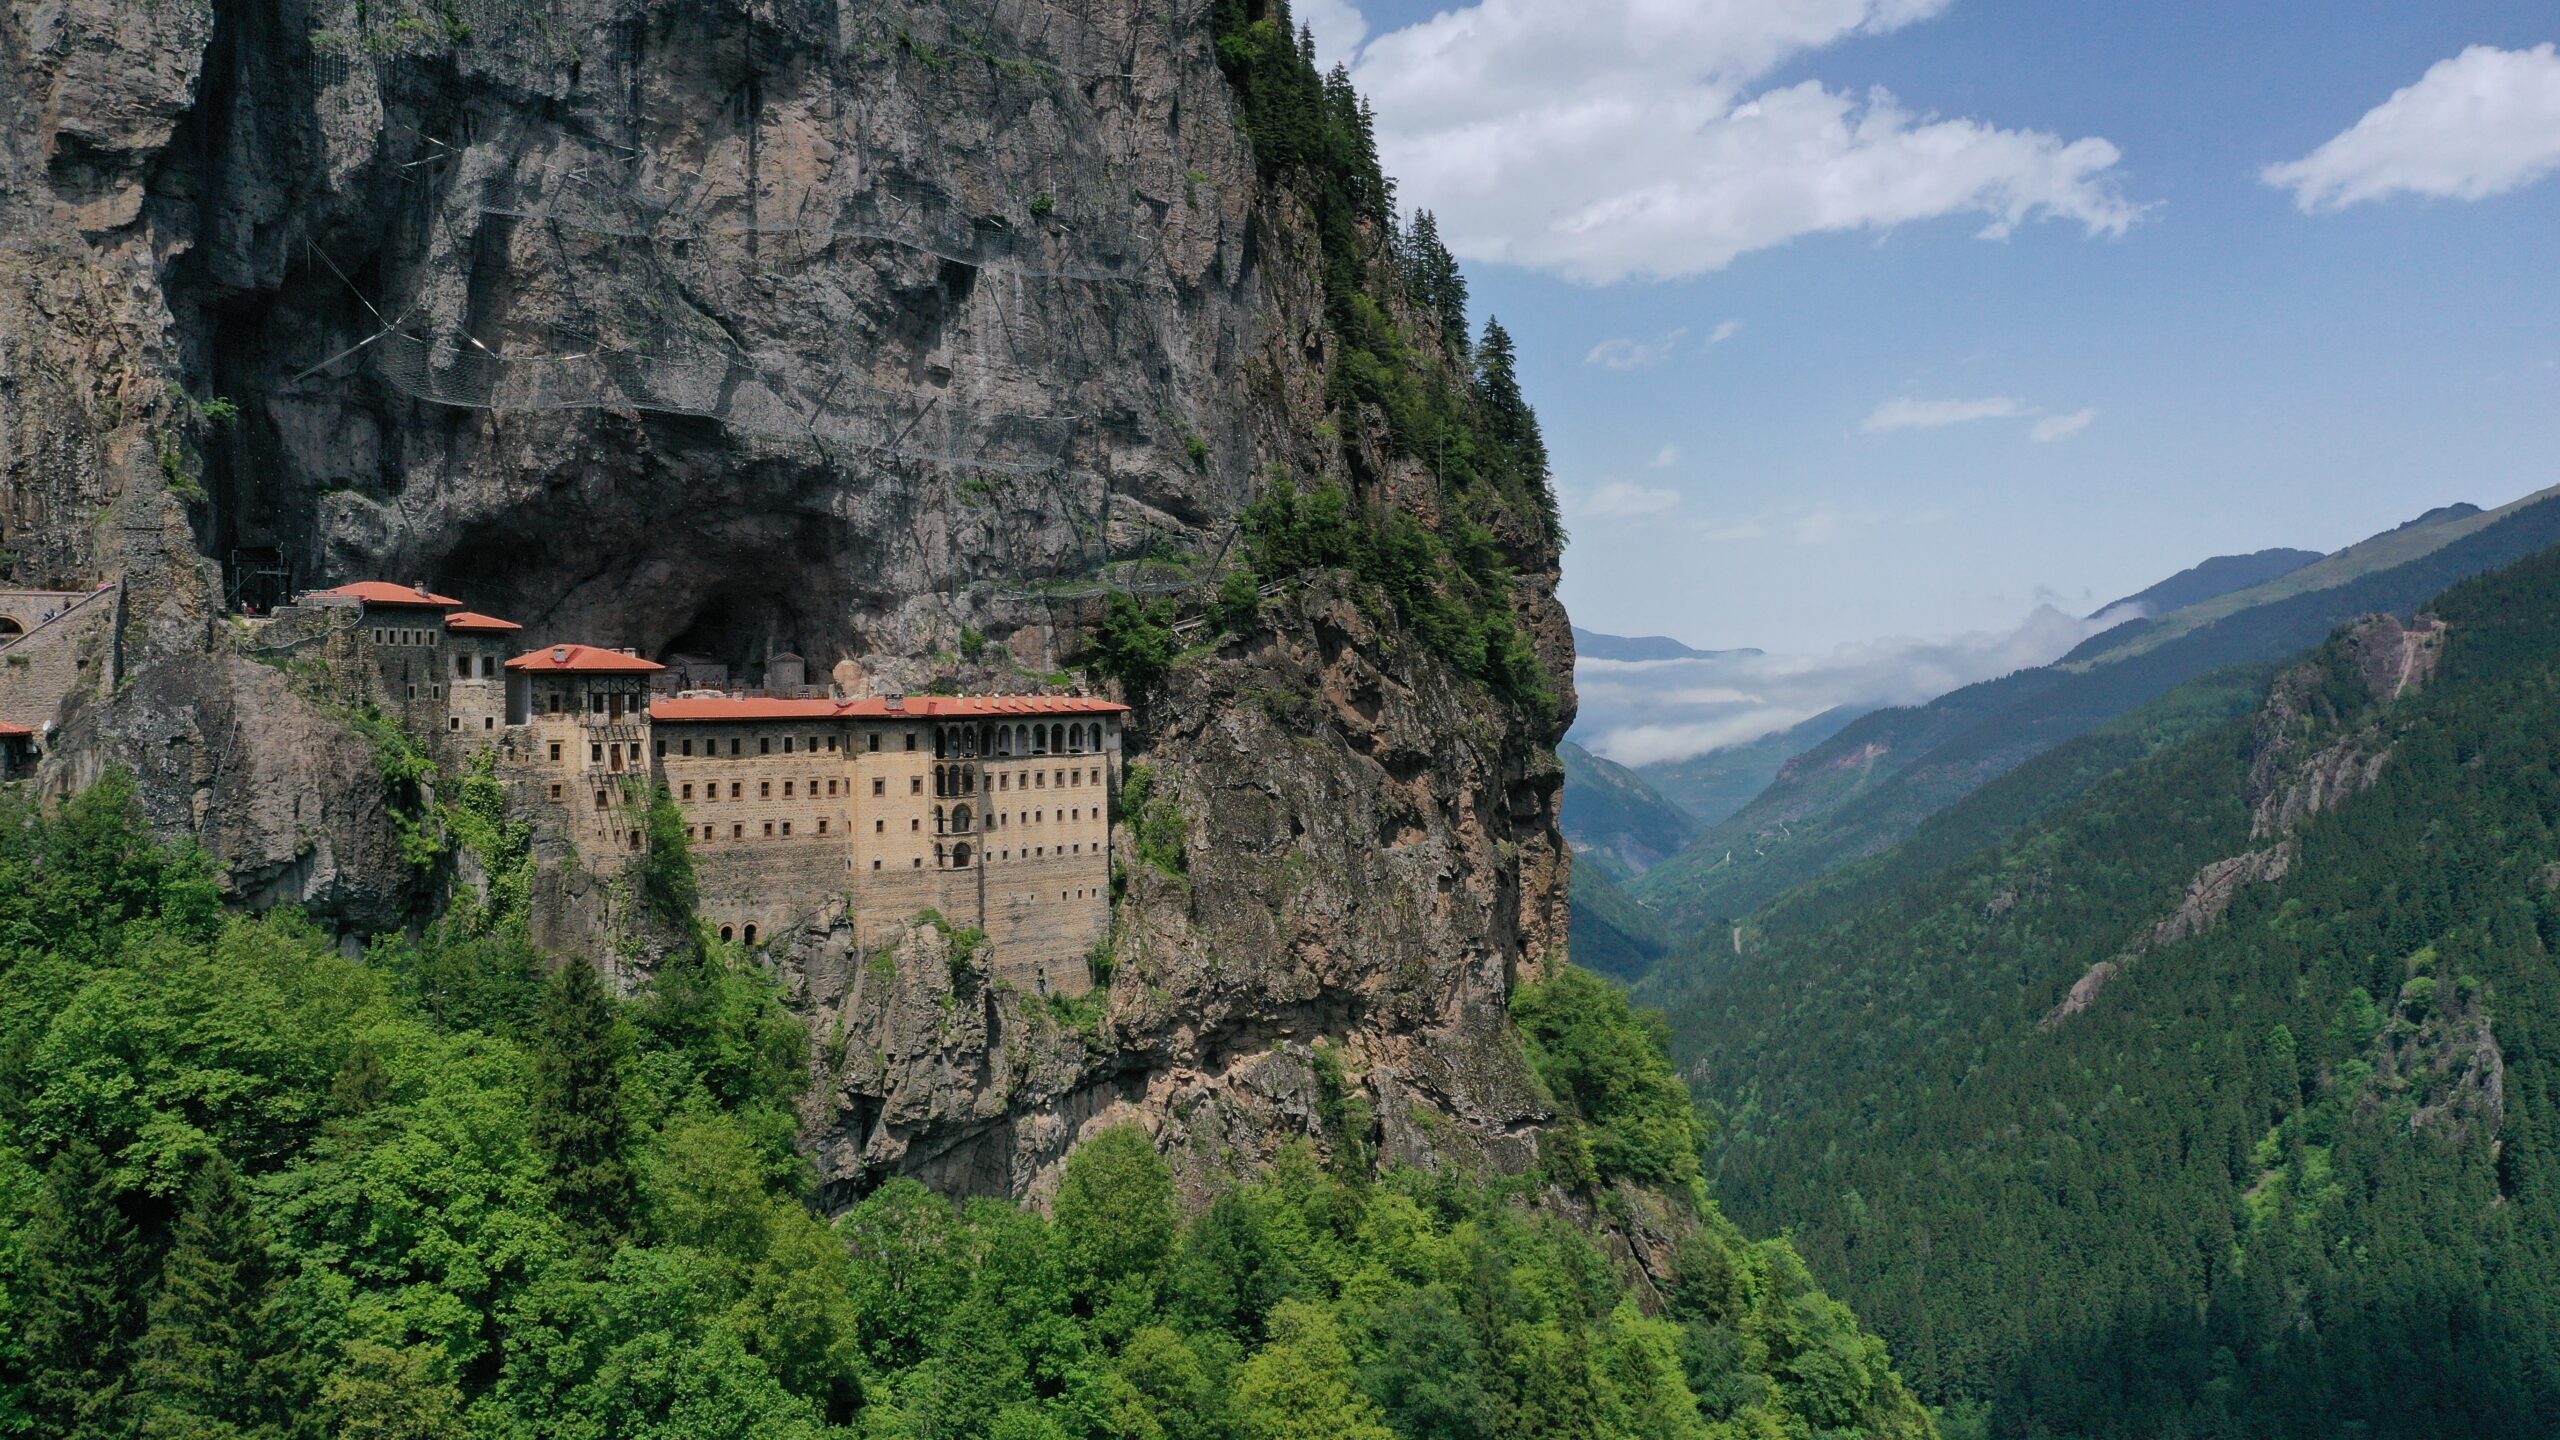 Claims of damage to ancient frescoes in Sumela Monastery debunked